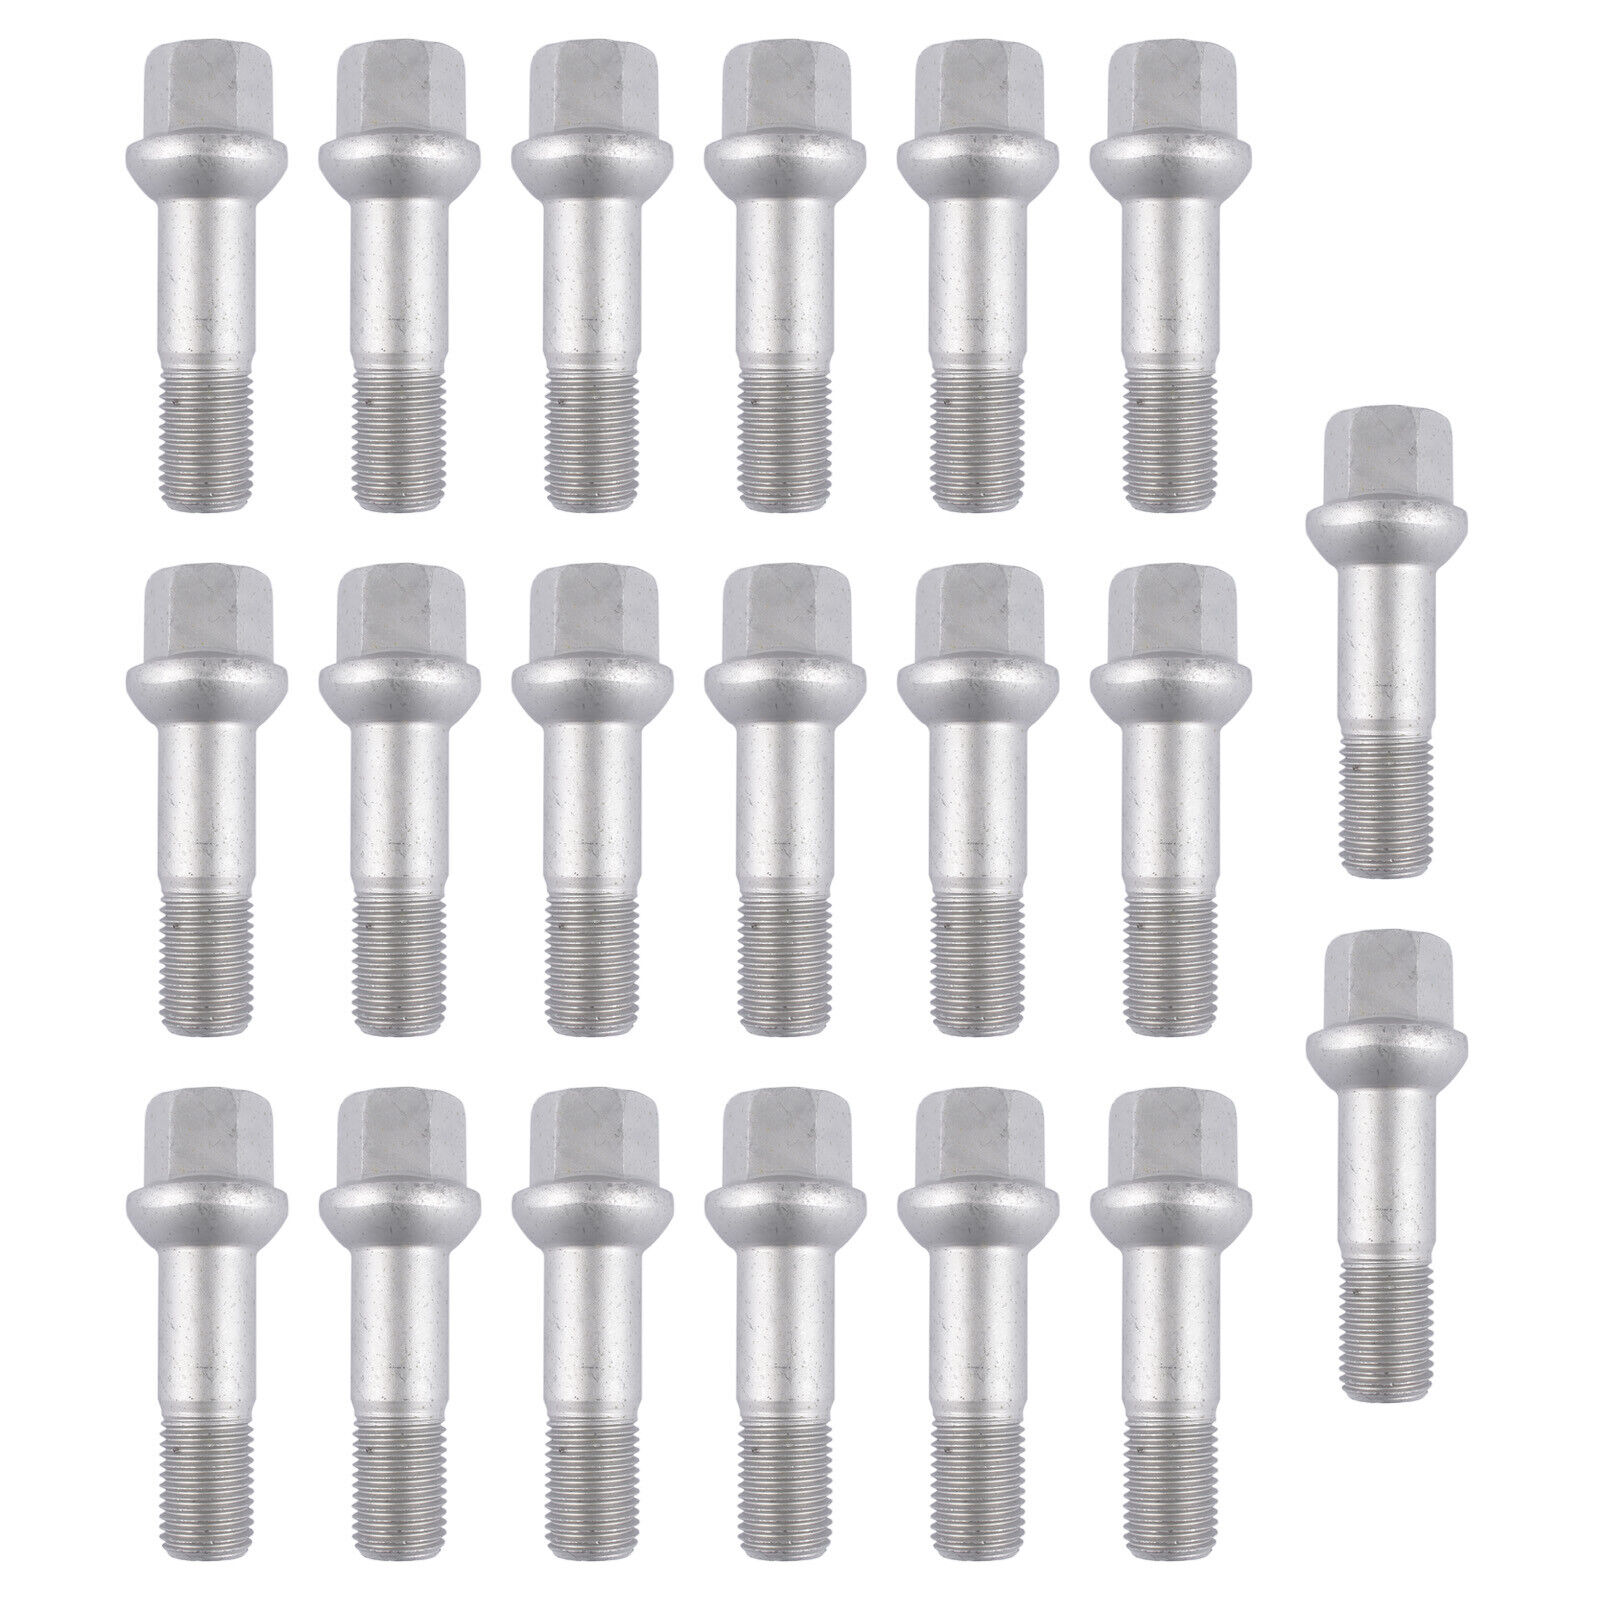 Wheel Lug Bolts Nuts (×20) Set for Mercedes-Benz S-CLASS S350 S430 S500 S55 AMG